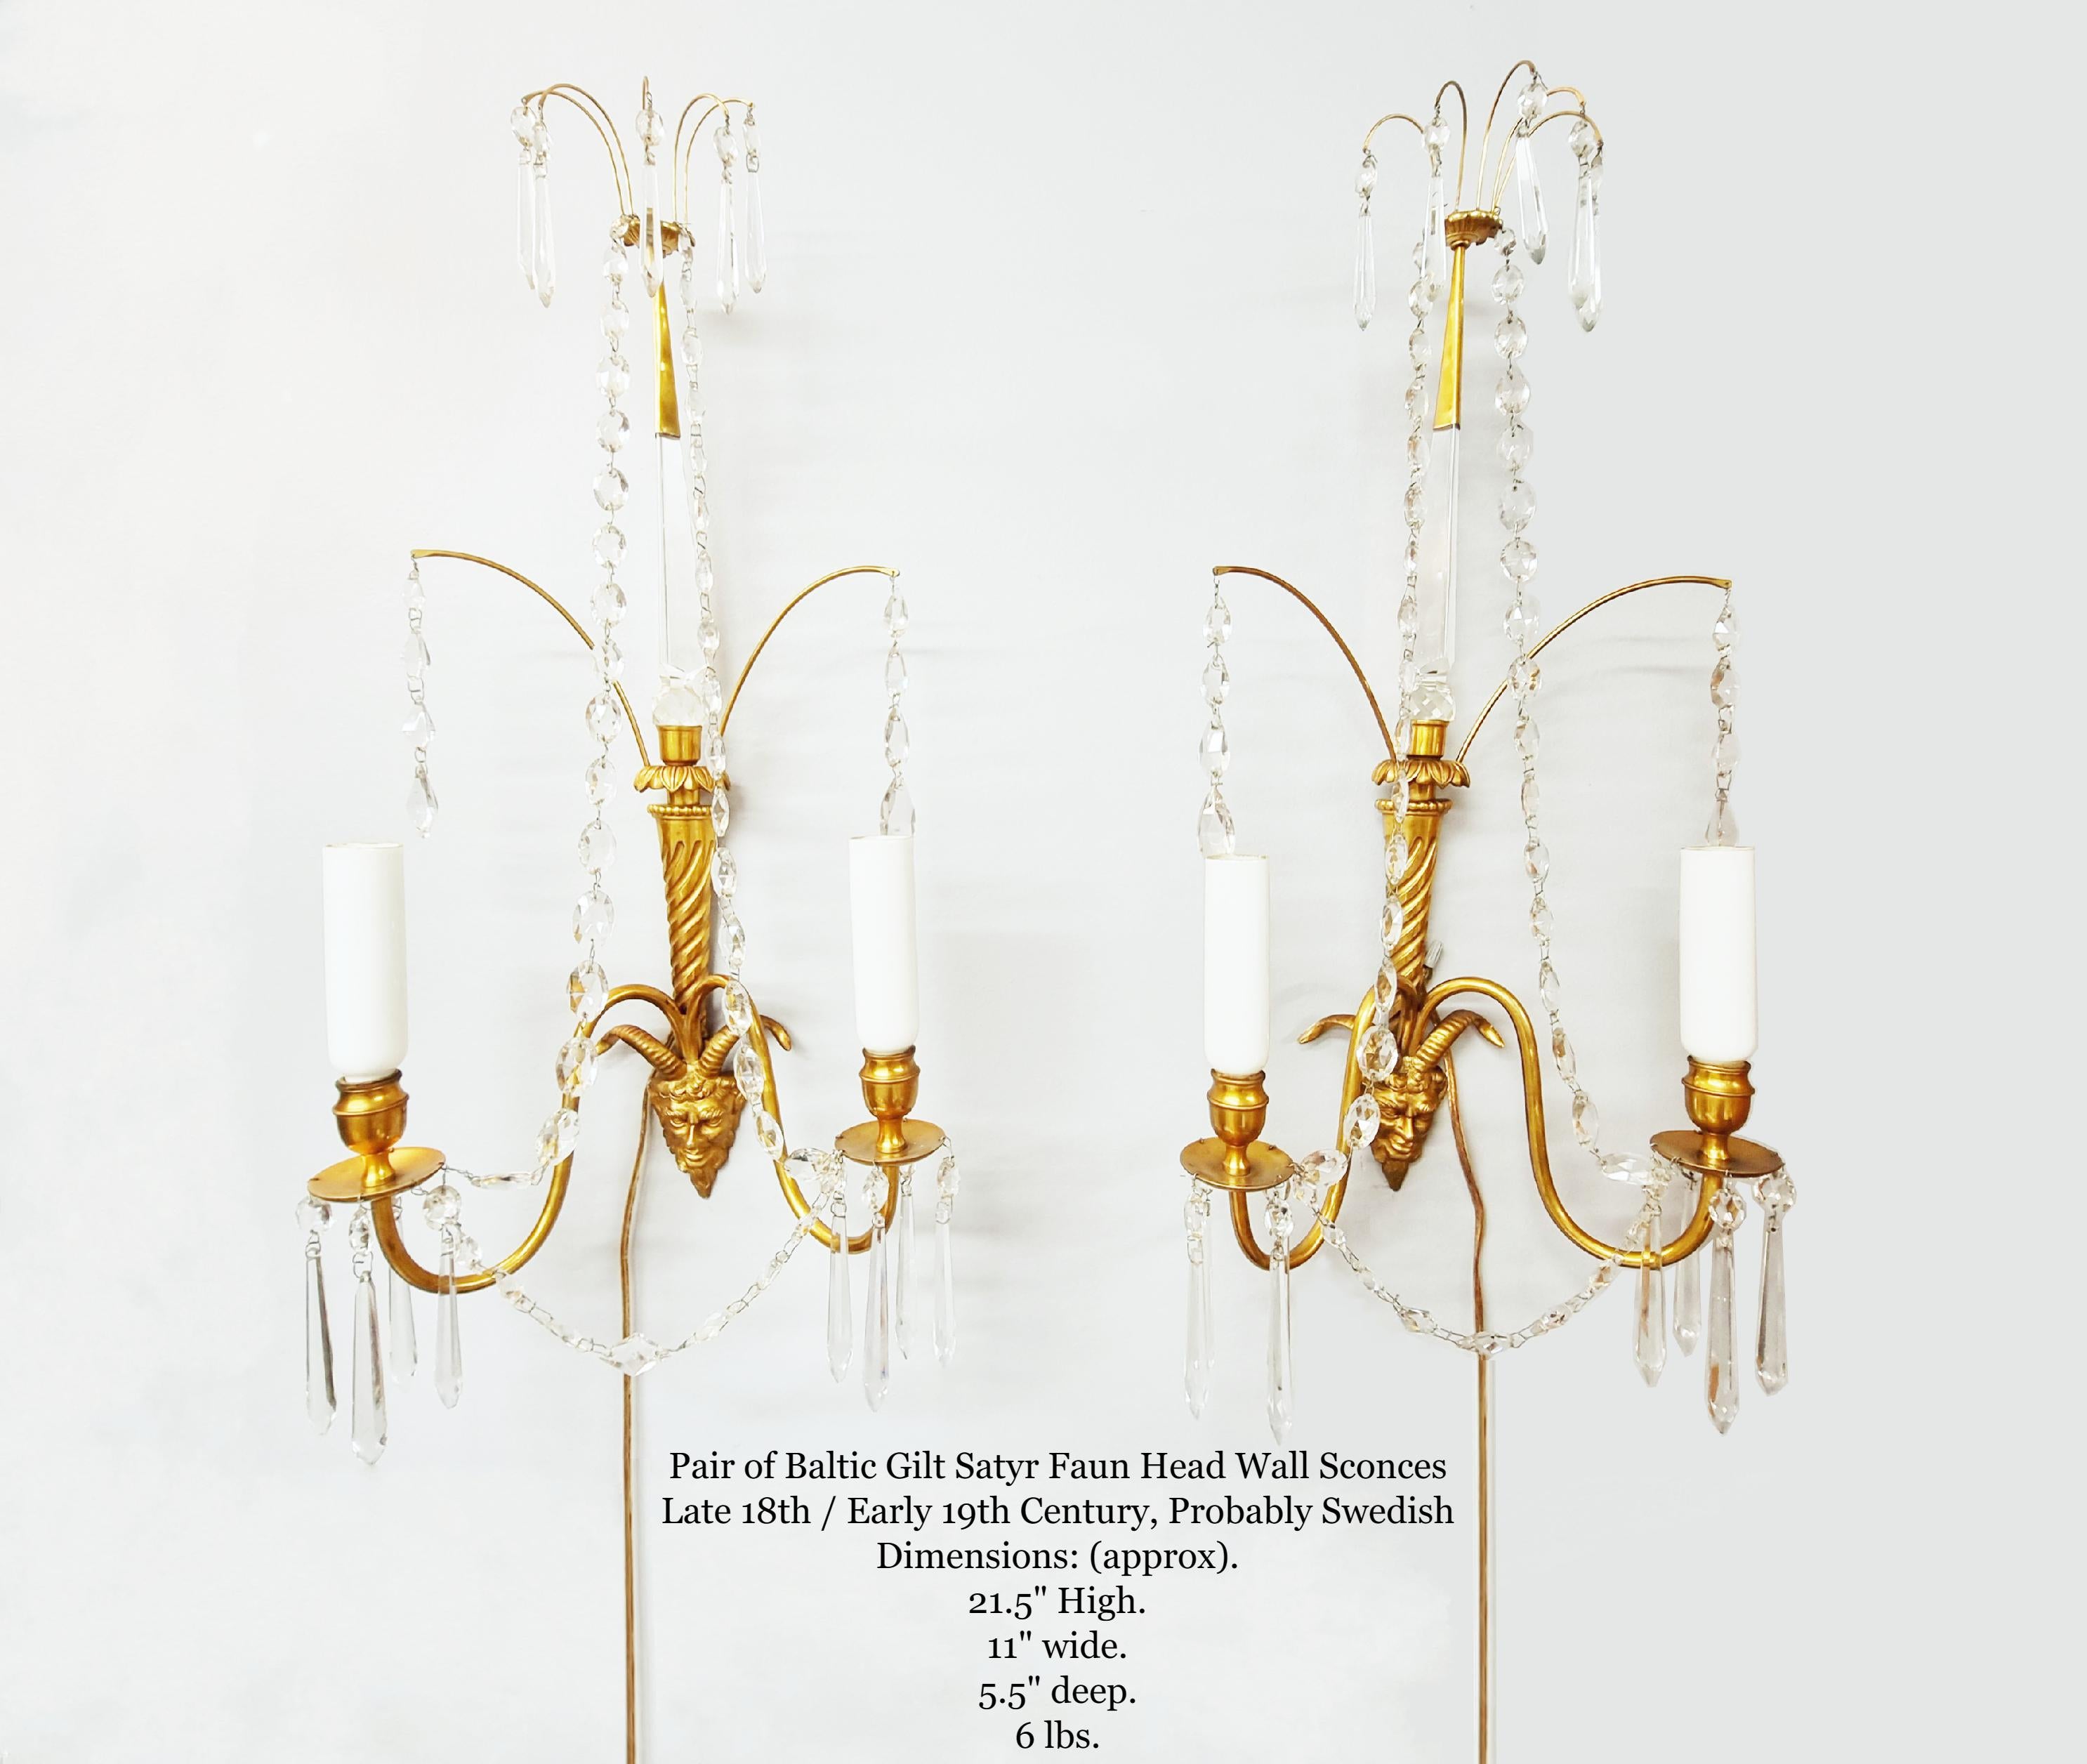 Pair of Baltic Gilt Satyr Faun Head Wall Sconces
Late 19th / Early 20th Century, Probably Swedish

Ball finial to gilt bronze canopy, five scrolls with prism drops, two chains from canopy to bobeches, central triangular crystal upper column